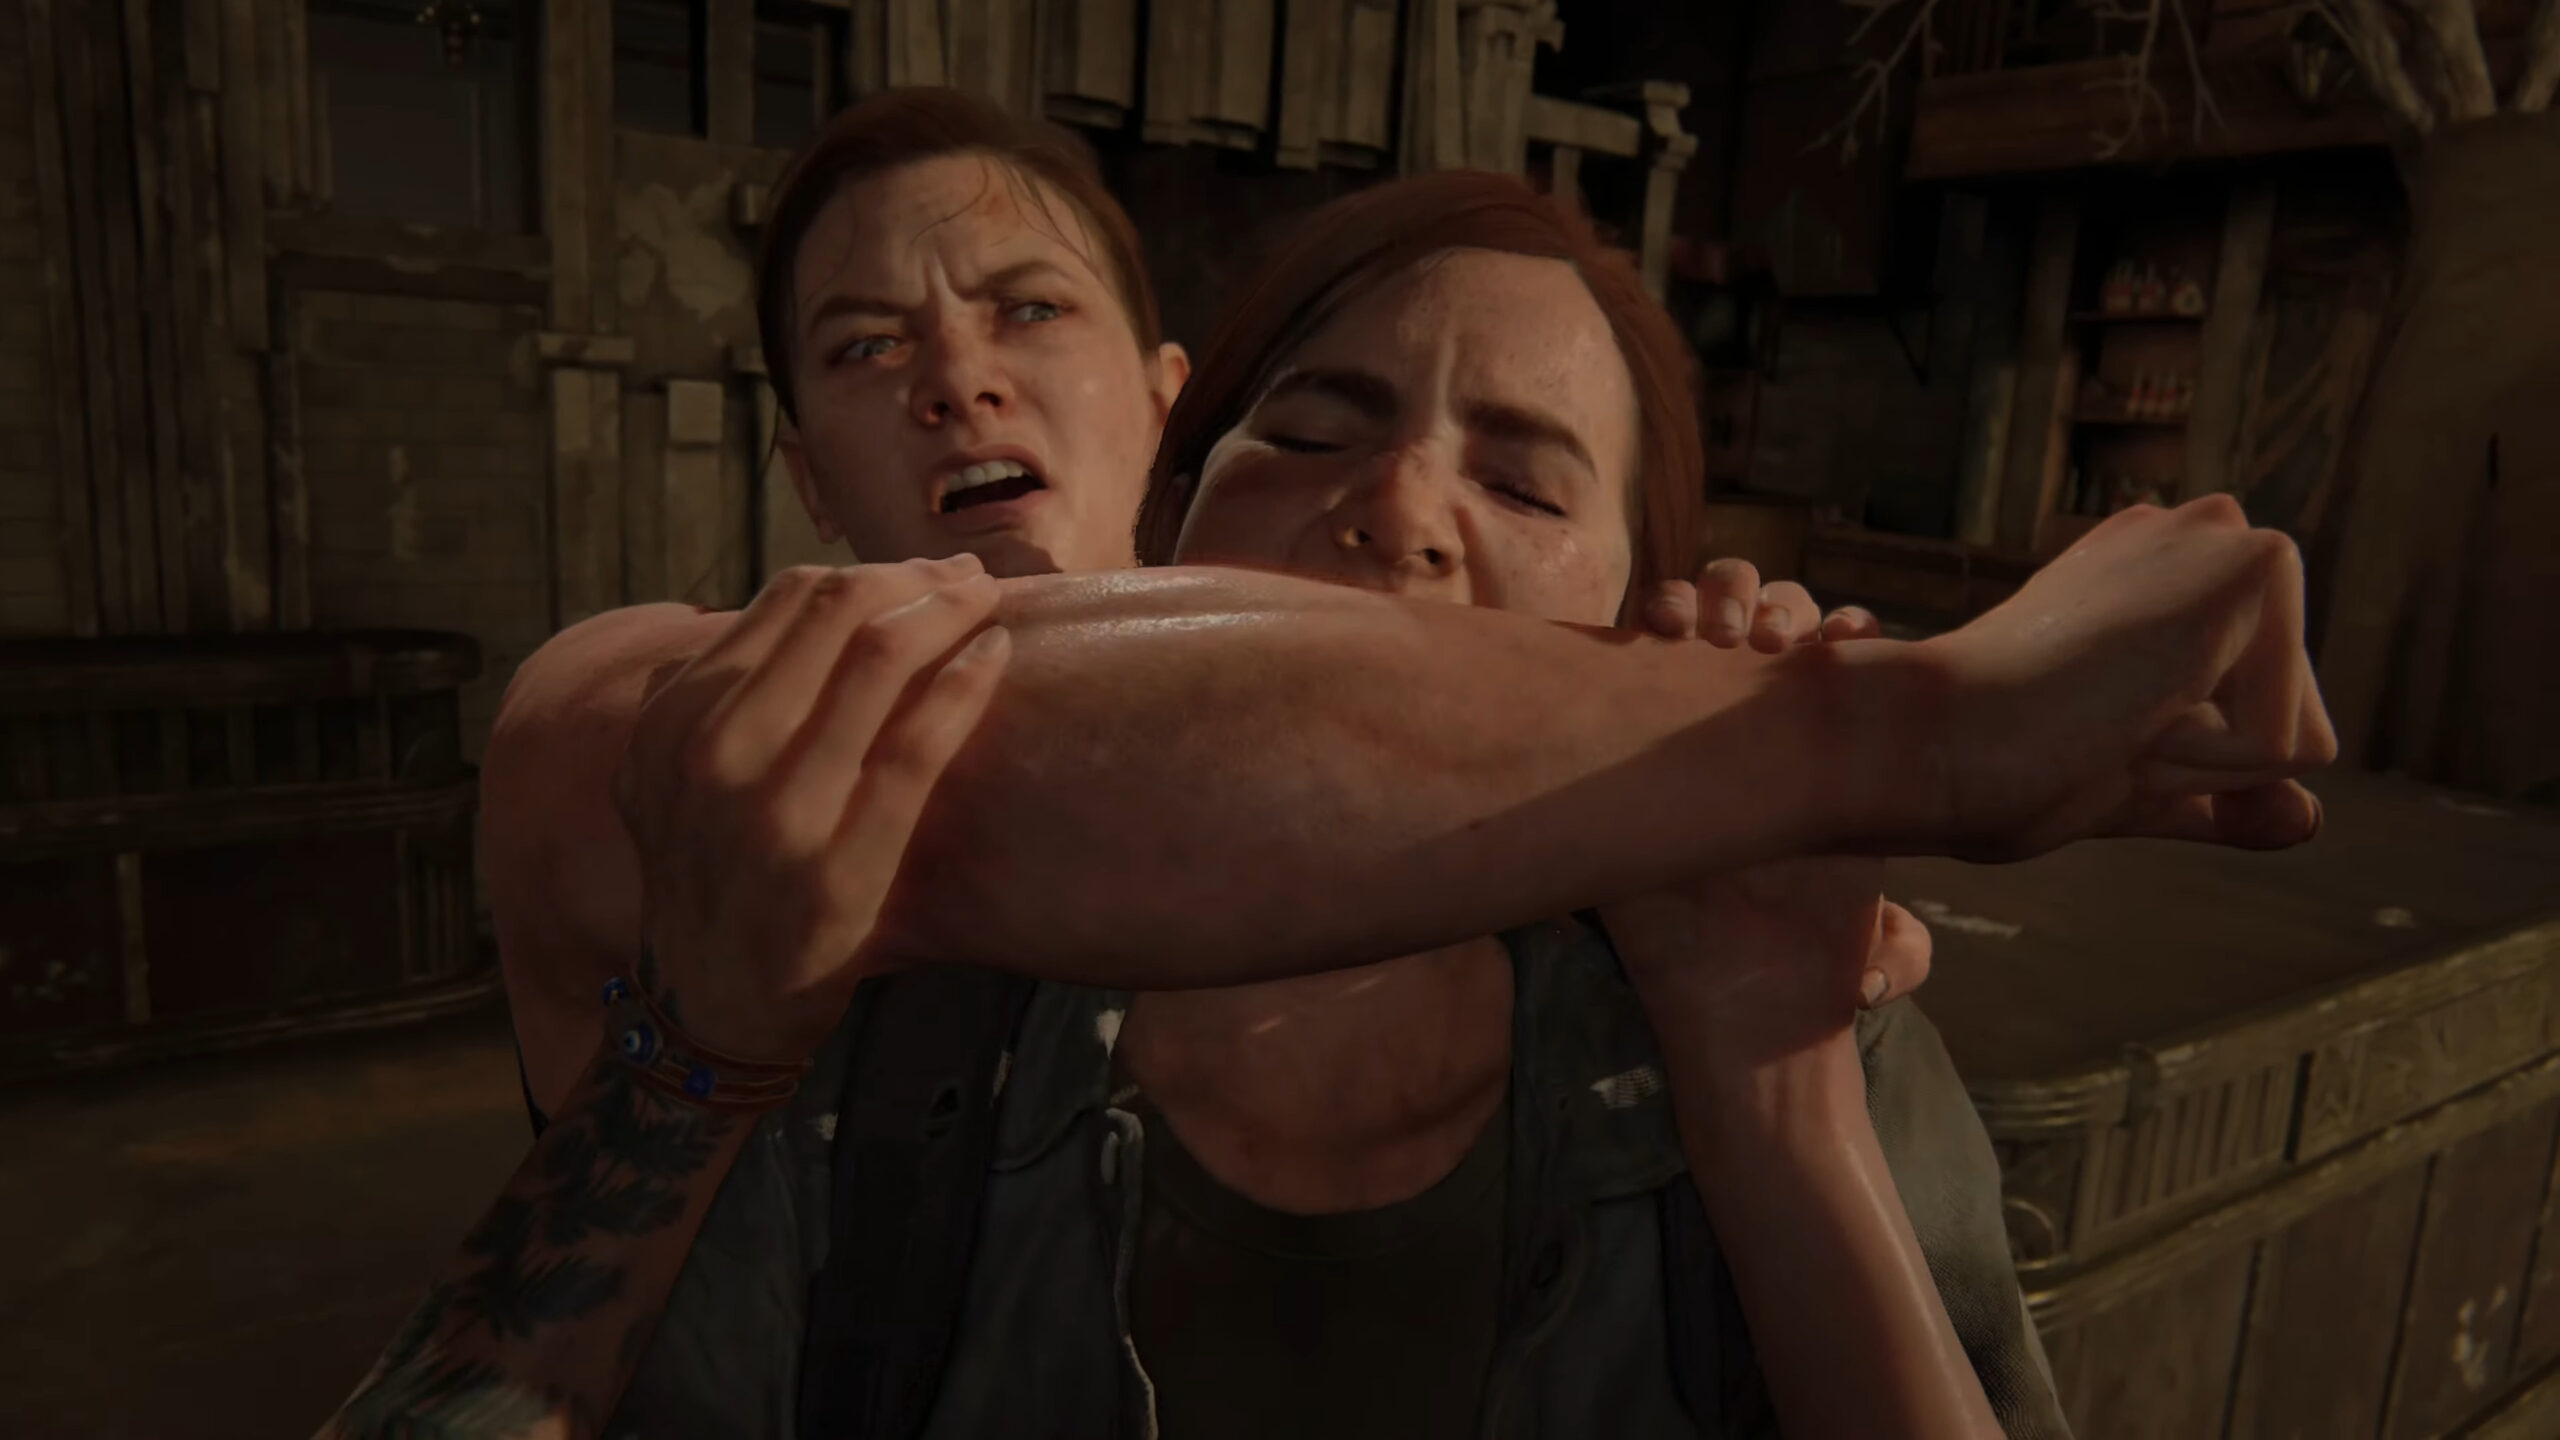 Ellie (Ashley Johnson) takes a bite out of Abby (Laura Bailey) in The Last of Us Part II (2020), Naughty Dog